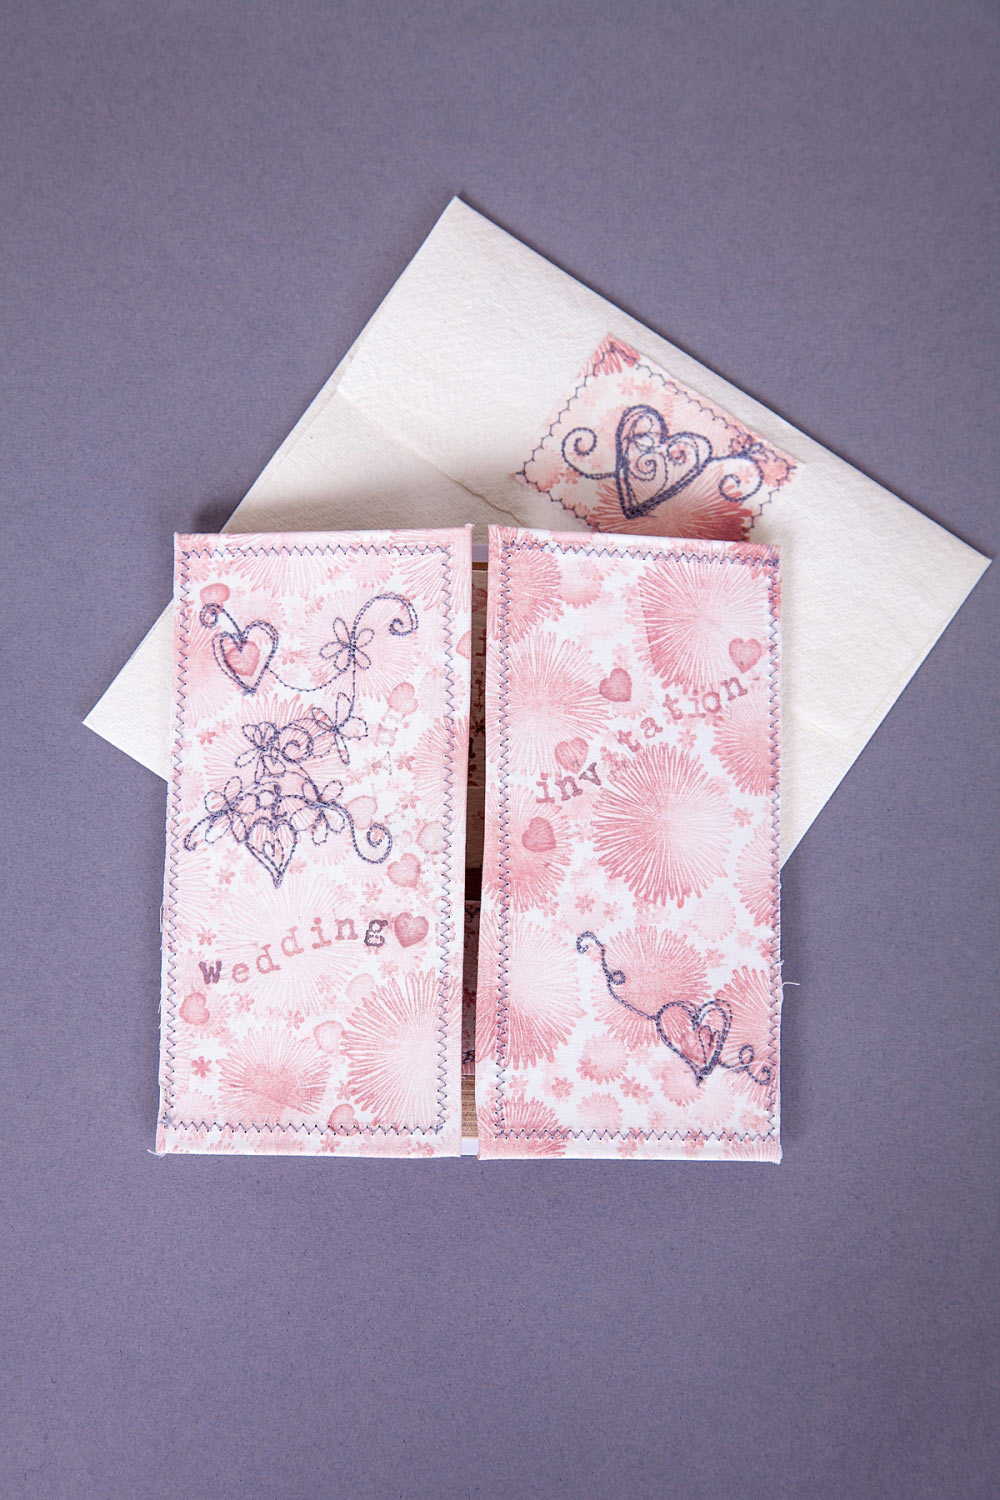 Statement Stationery from Handmade by Hilly